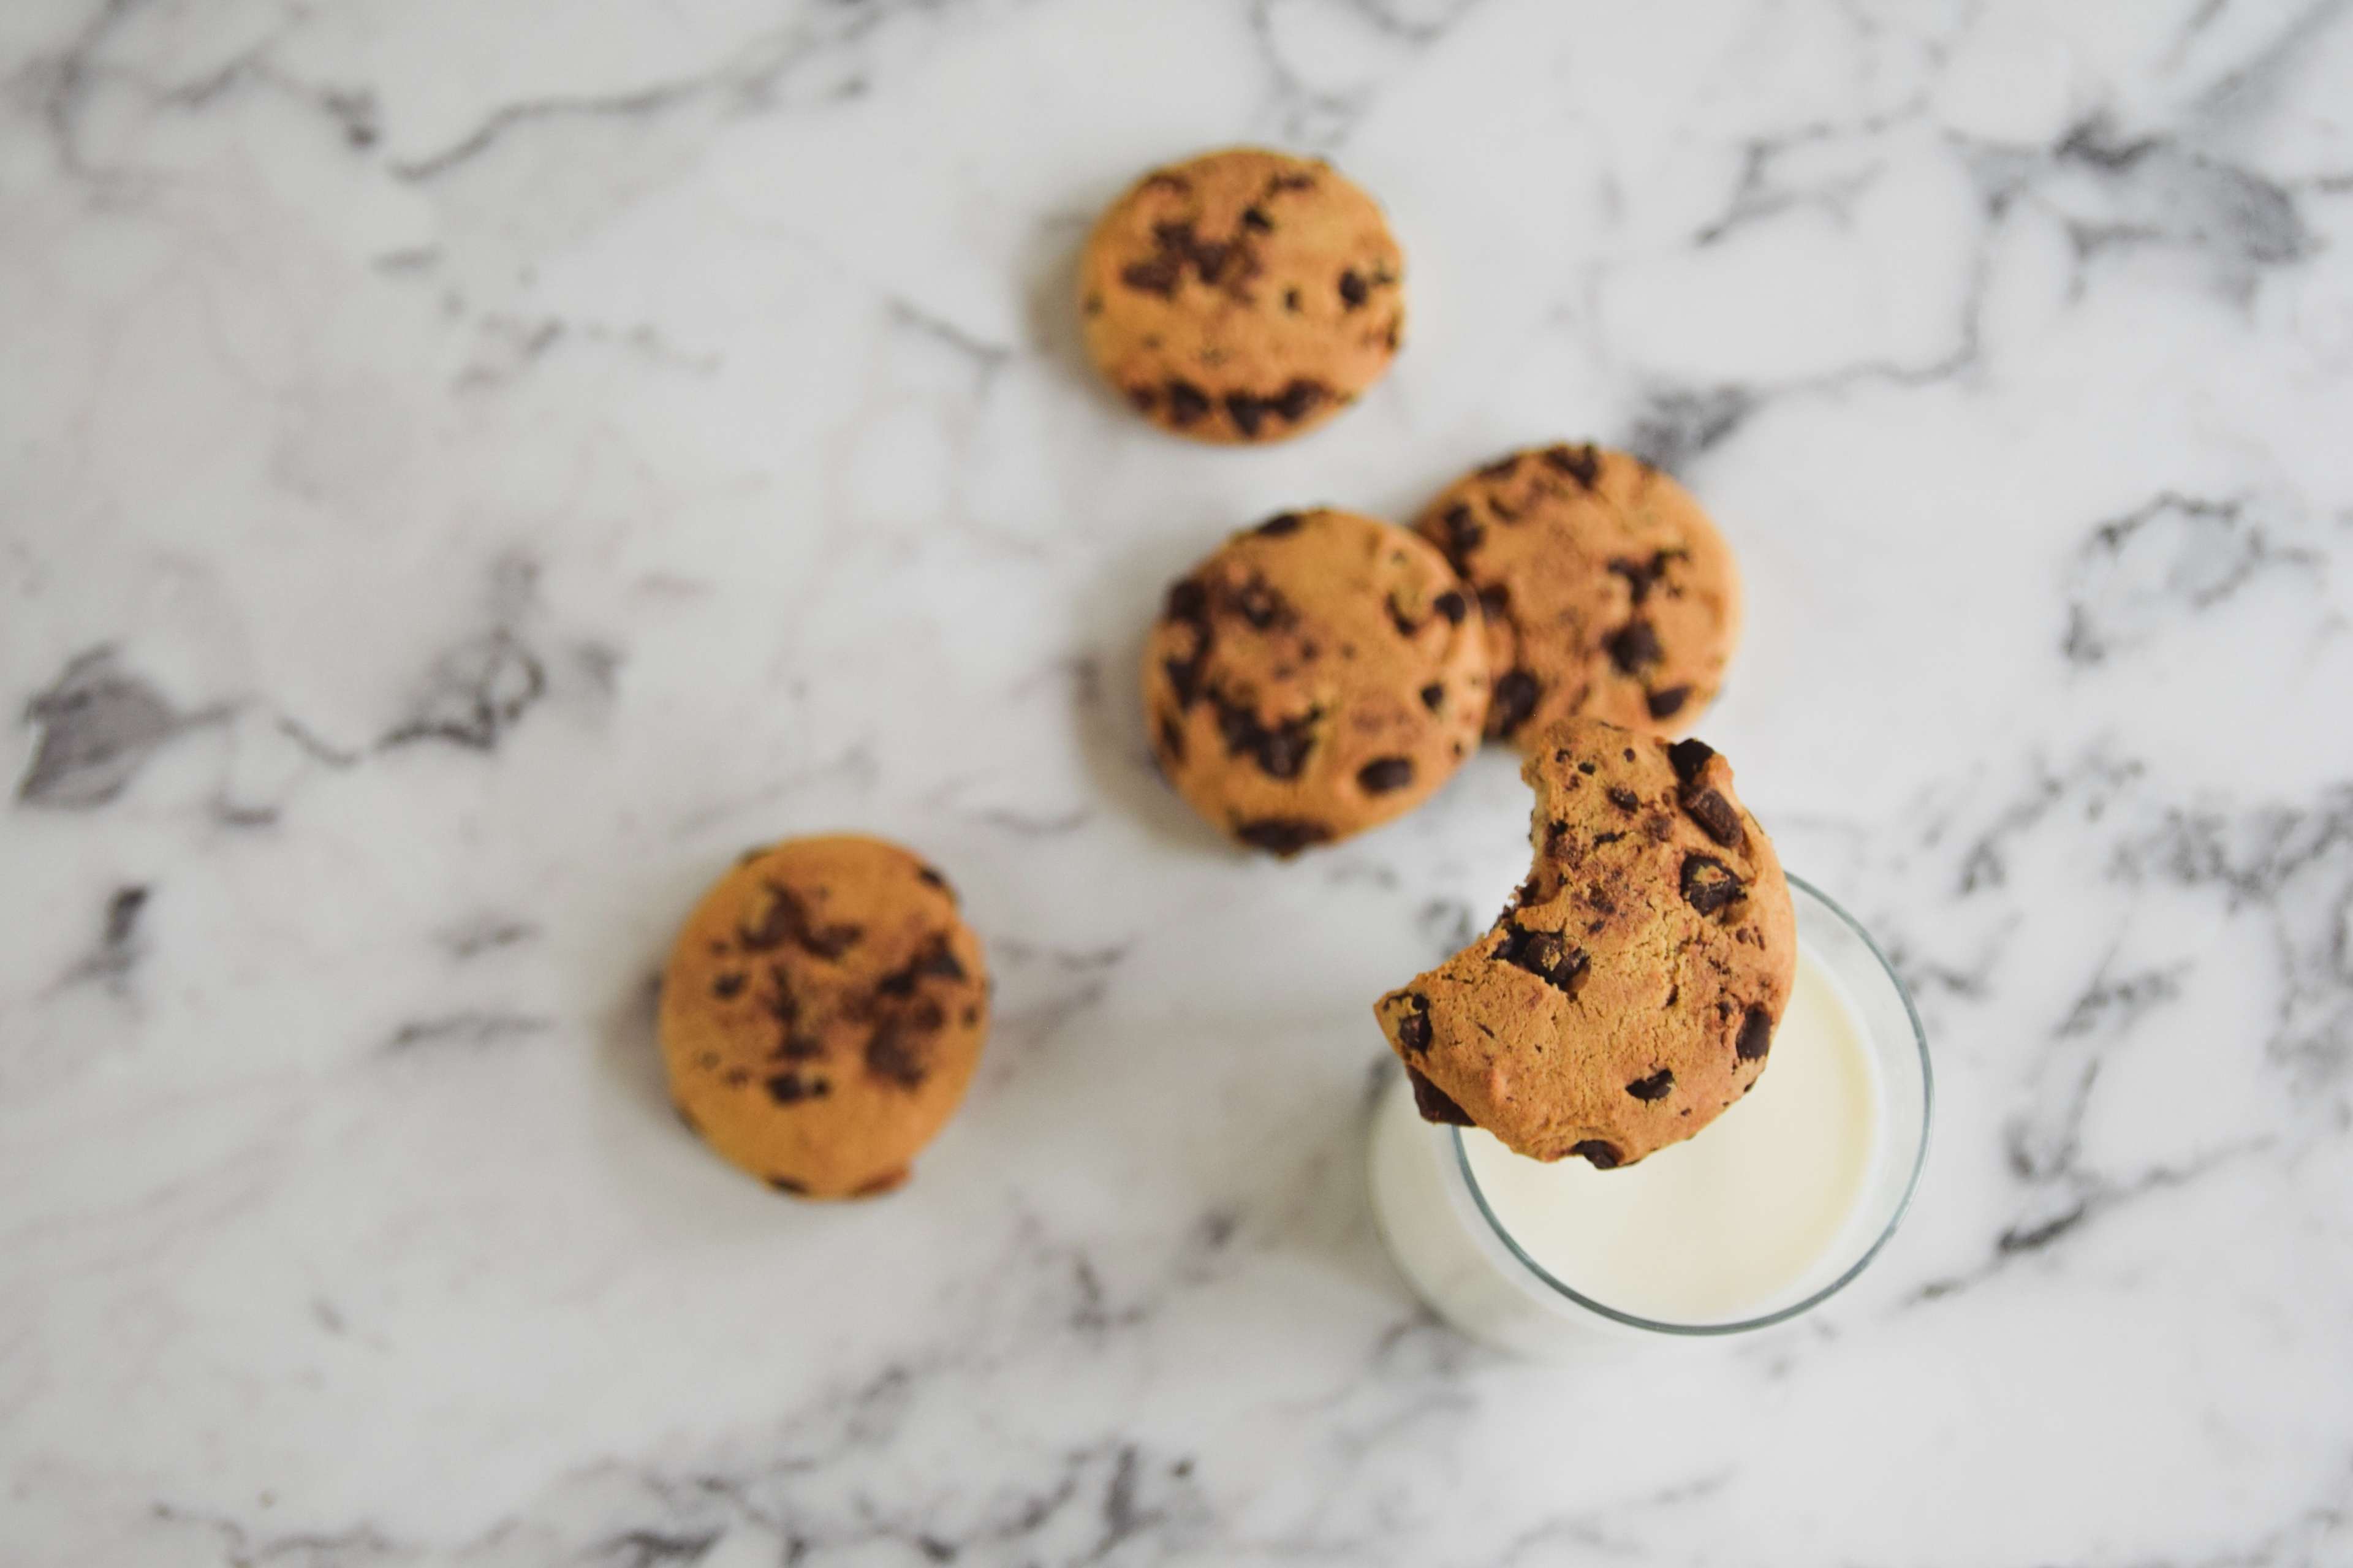 5 chocolate chip cookies on top a quartz countertop with one on top a glass of milk with a bite taken out